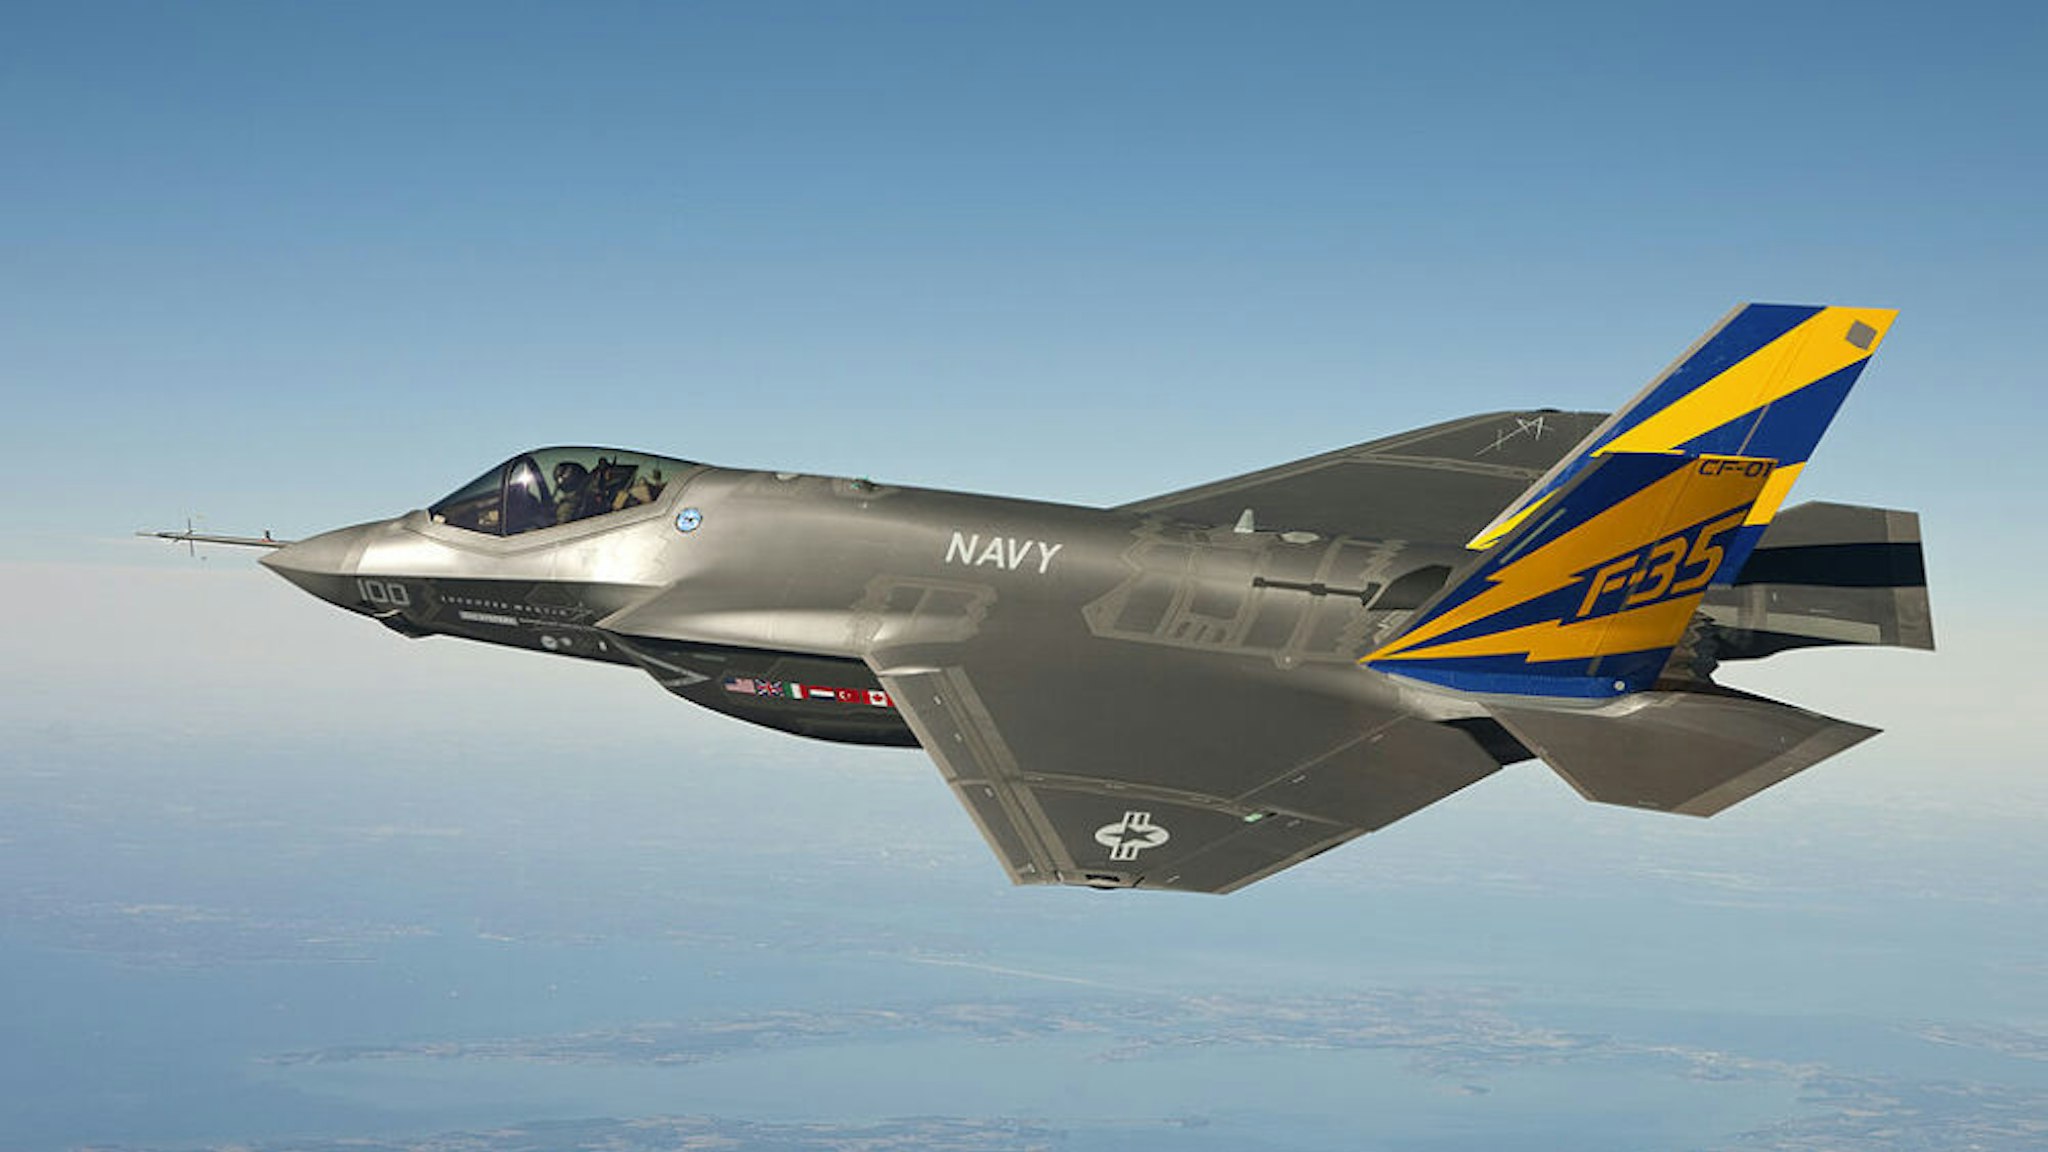 IN AIR, NAVAL AIR STATION PATUXENT RIVER, MD - FEBRUARY 11: (EDITORS NOTE: Image has been received by U.S. Military prior to transmission) In this image released by the U.S. Navy courtesy of Lockheed Martin, the U.S. Navy variant of the F-35 Joint Strike Fighter, the F-35C, conducts a test flight February 11, 2011 over the Chesapeake Bay. Lt. Cmdr. Eric "Magic" Buus flew the F-35C for two hours, checking instruments that will measure structural loads on the airframe during flight maneuvers. The F-35C is distinct from the F-35A and F-35B variants with larger wing surfaces and reinforced landing gear for greater control when operating in the demanding carrier take-off and landing environment.